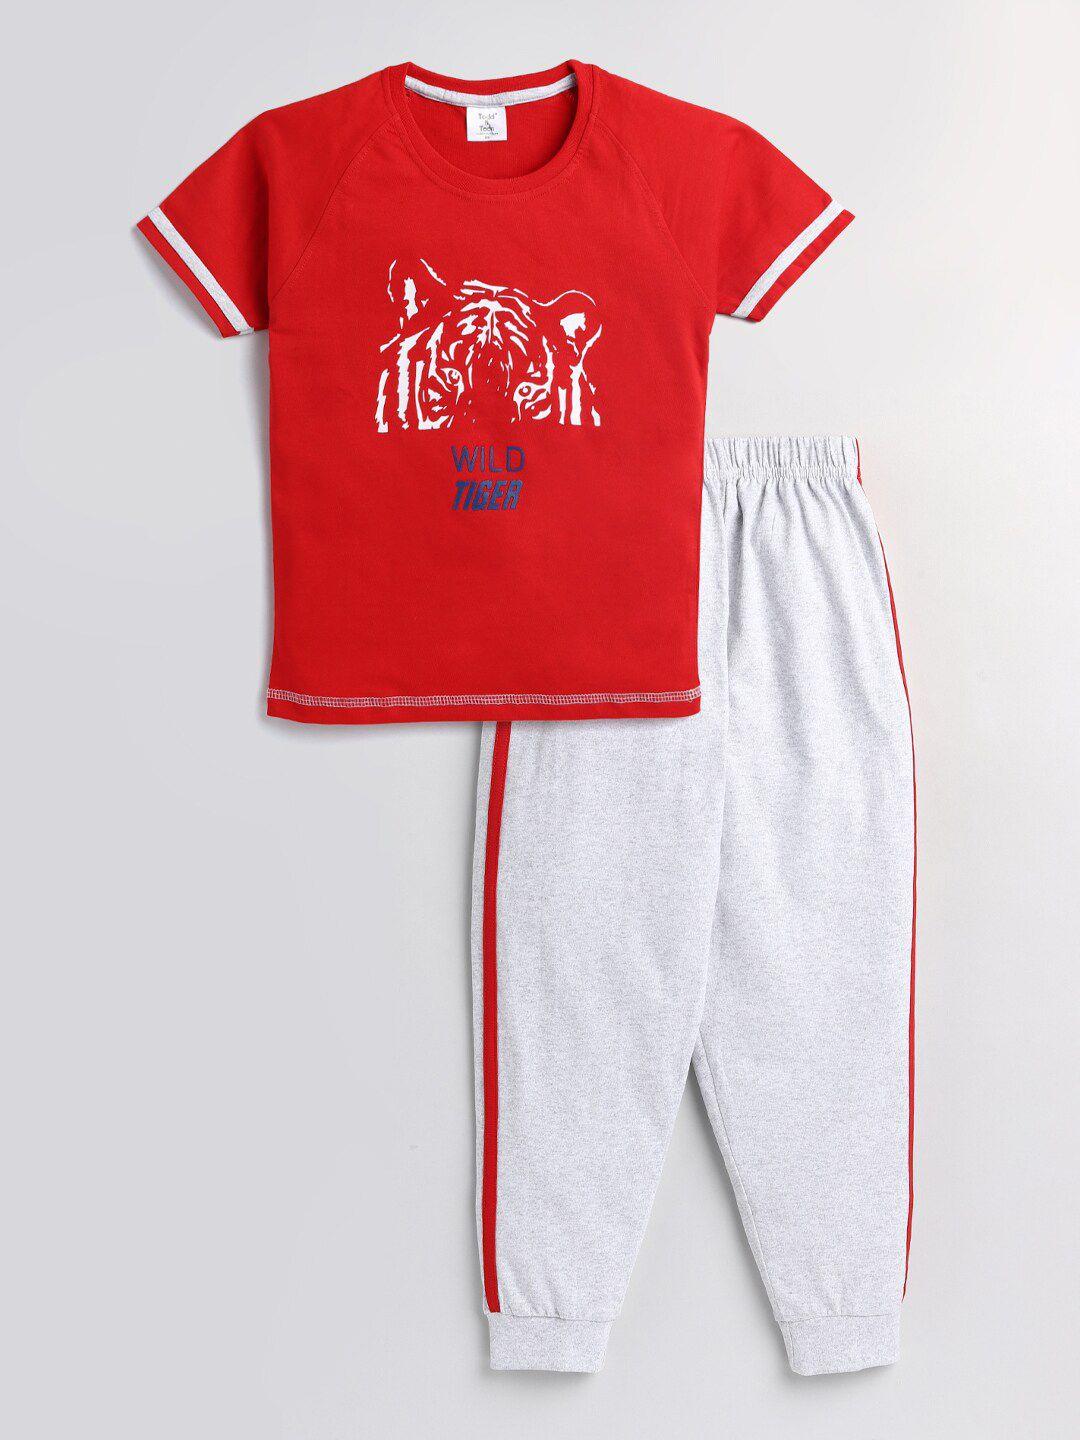 todd n teen boys red printed t-shirt with capris